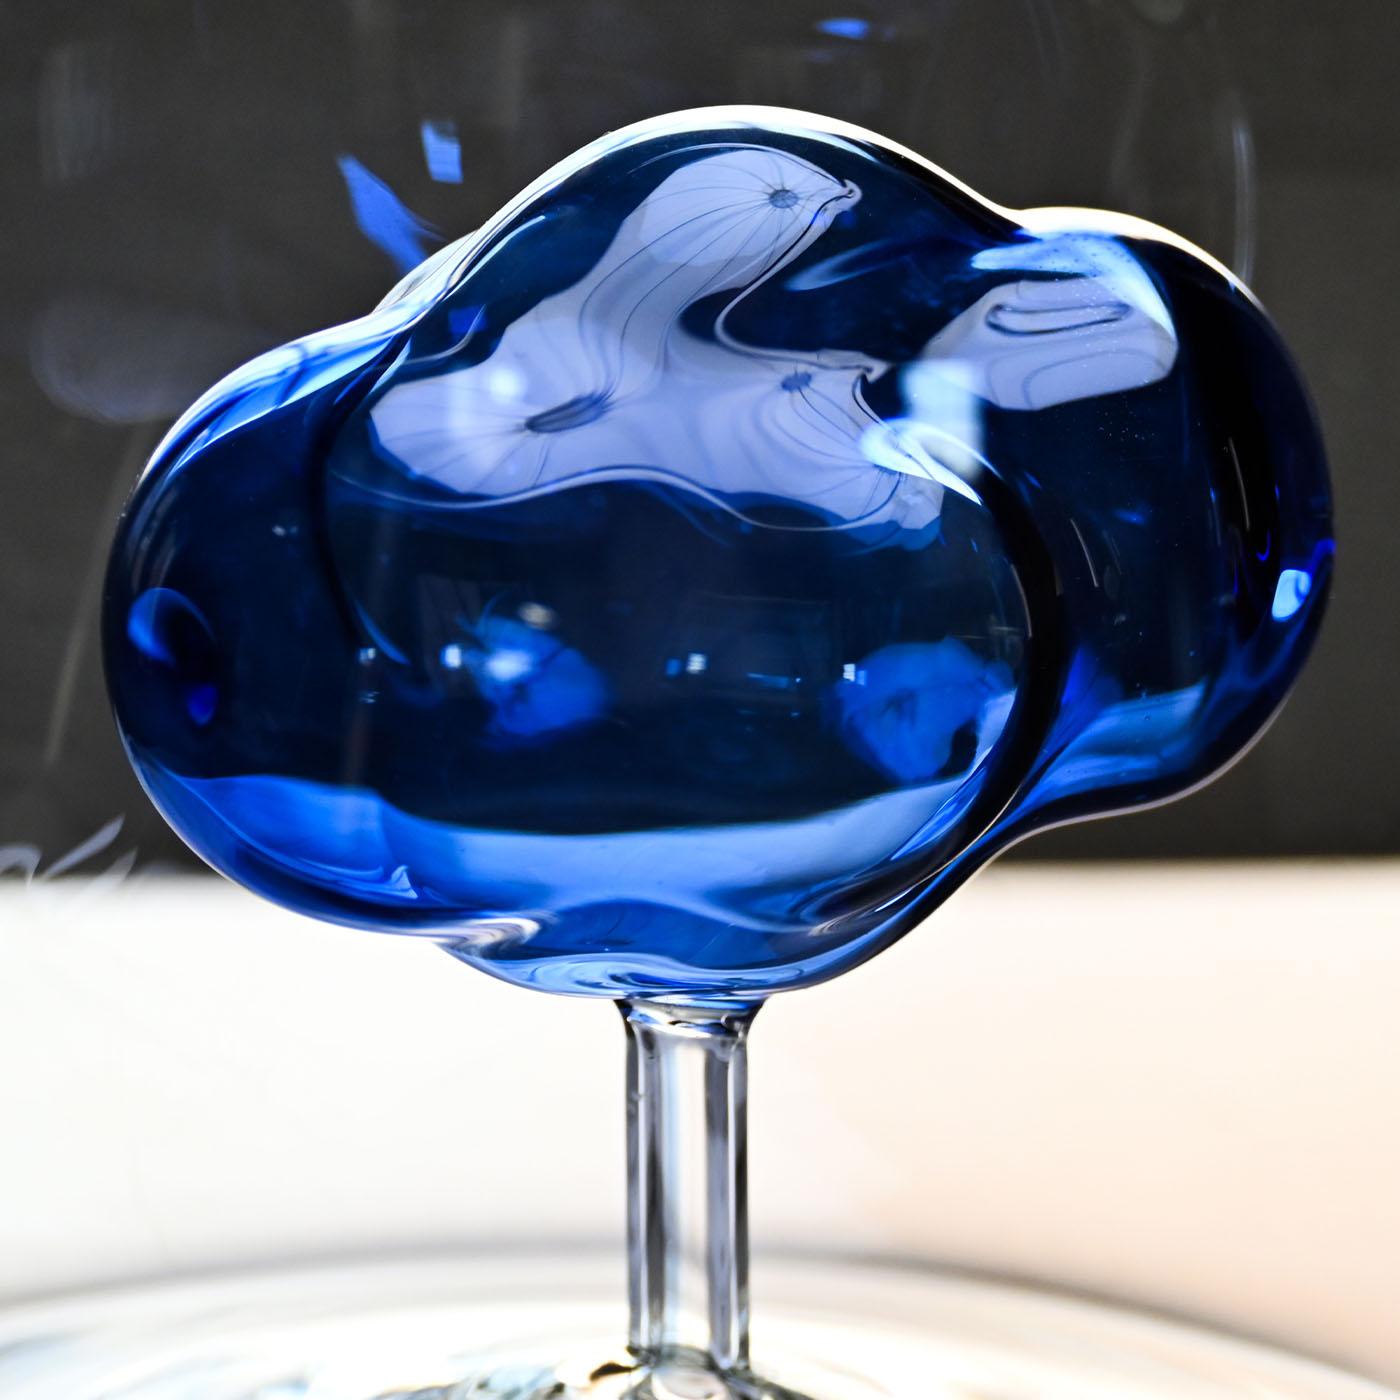 Glass Jug, with a blue cloud inside. Superbly handcrafted by master artisans of the Venetian glassmaking tradition, this jug has a dreamlike taste. Showcasing a classic transparent silhouette, the piece is adorned with a blue glass cloud inside.